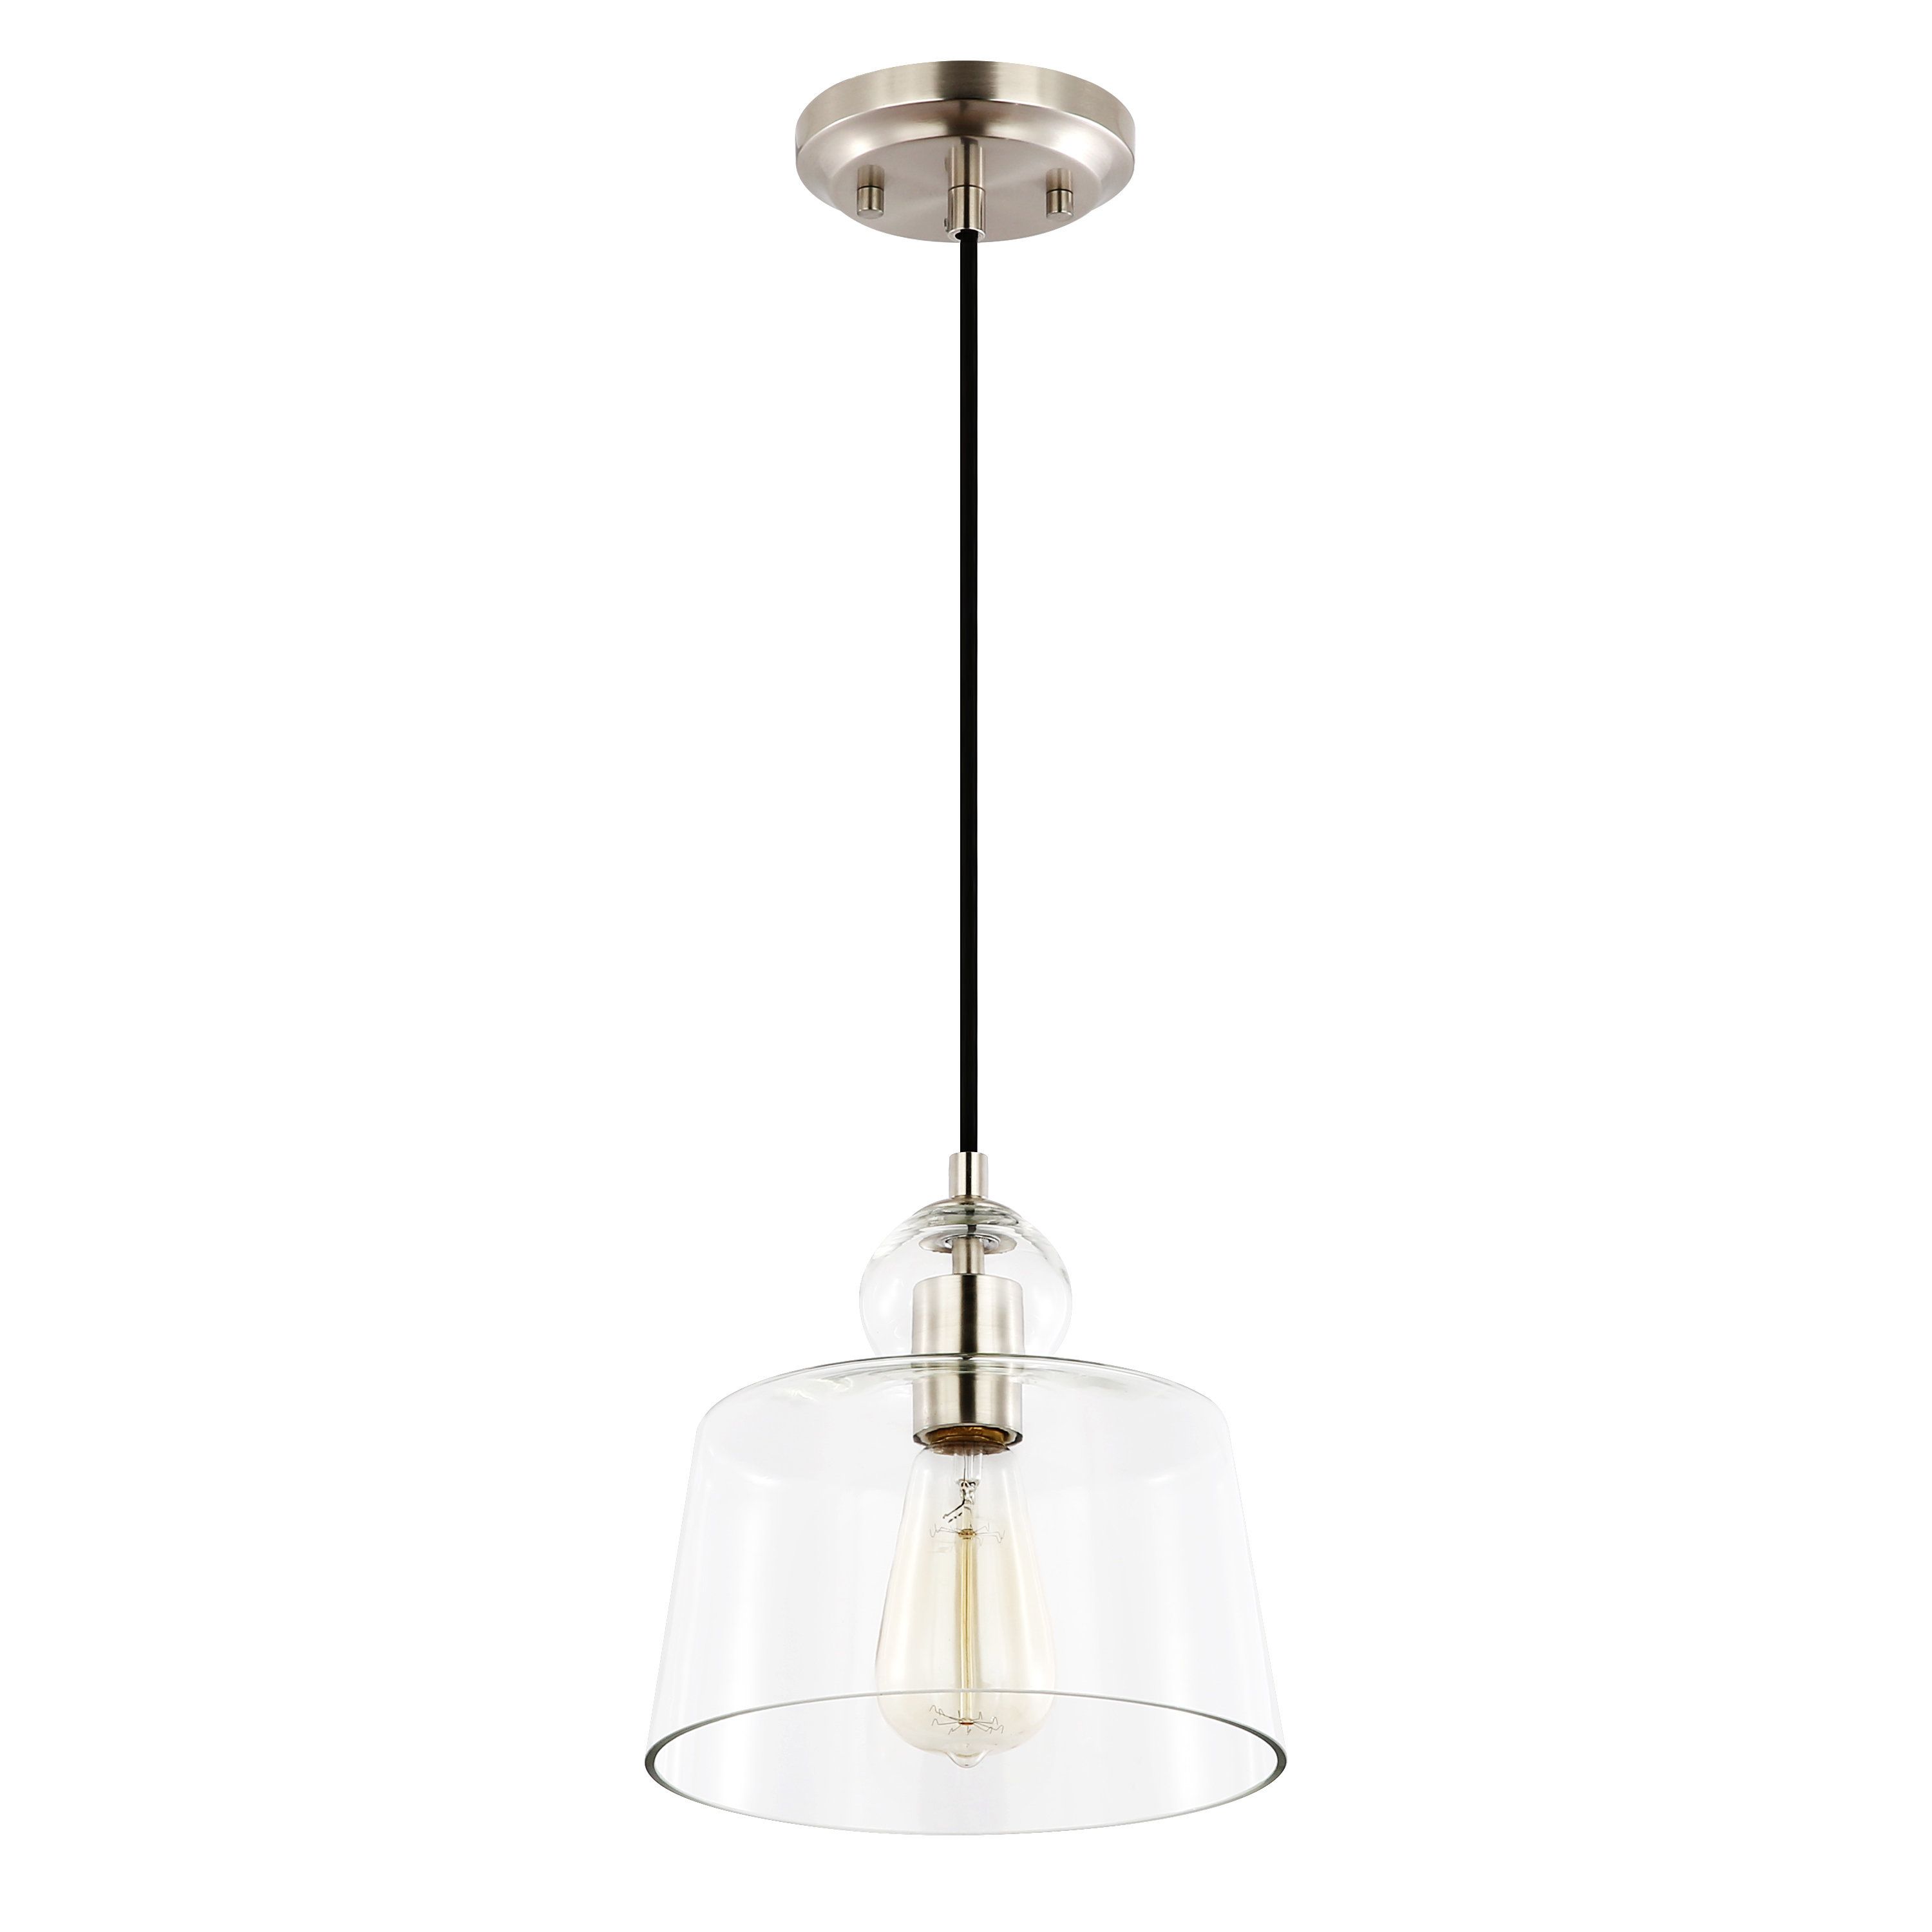 Bell Pendant Light Fixture – The Arts With Regard To Grullon Scroll 1 Light Single Bell Pendants (View 29 of 30)